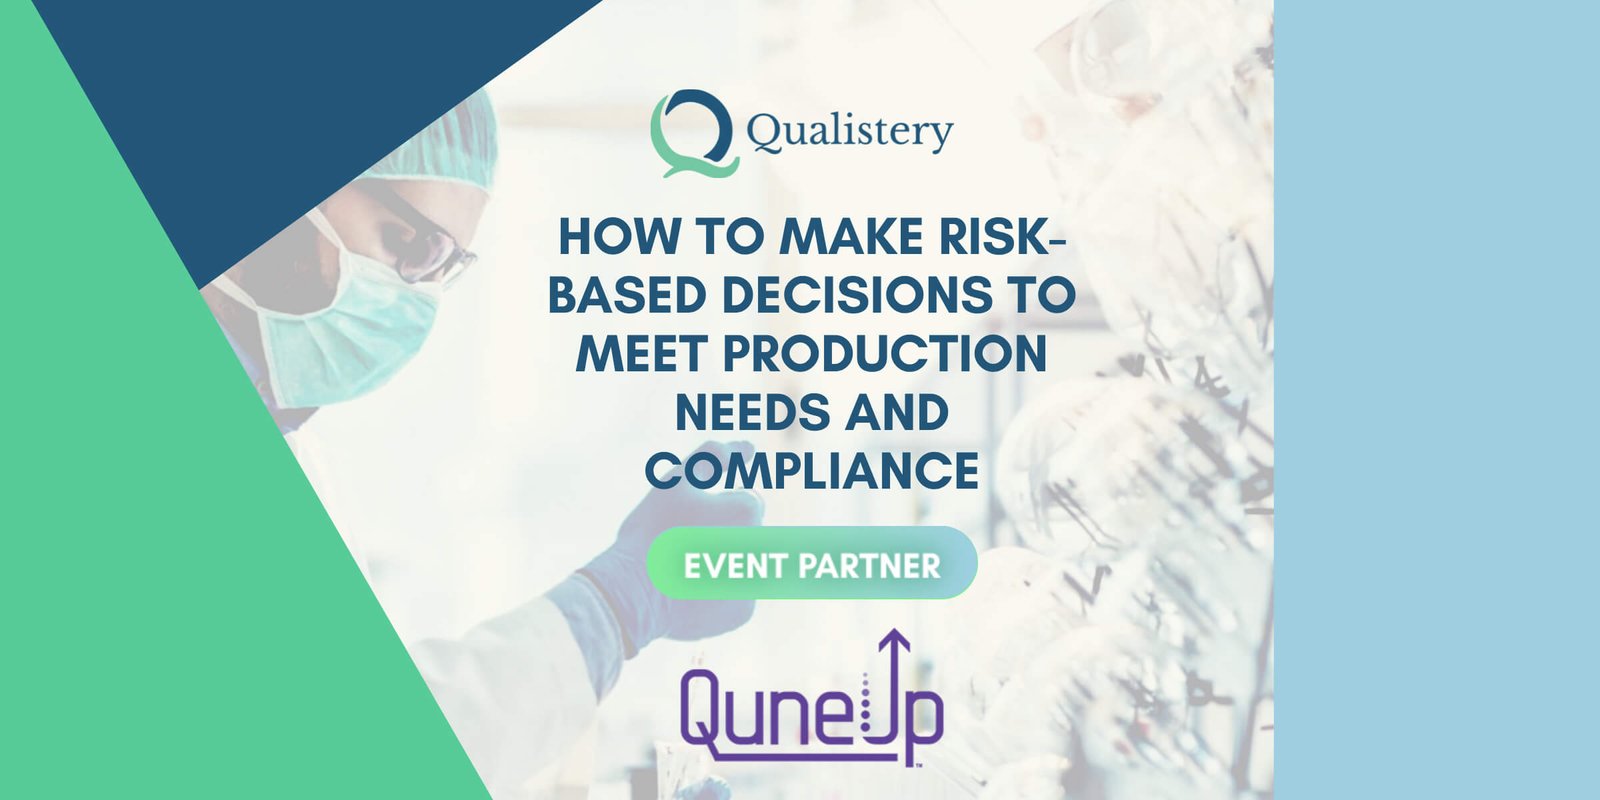 How to Make Risk-Based Decisions to Meet Production Needs and Compliance